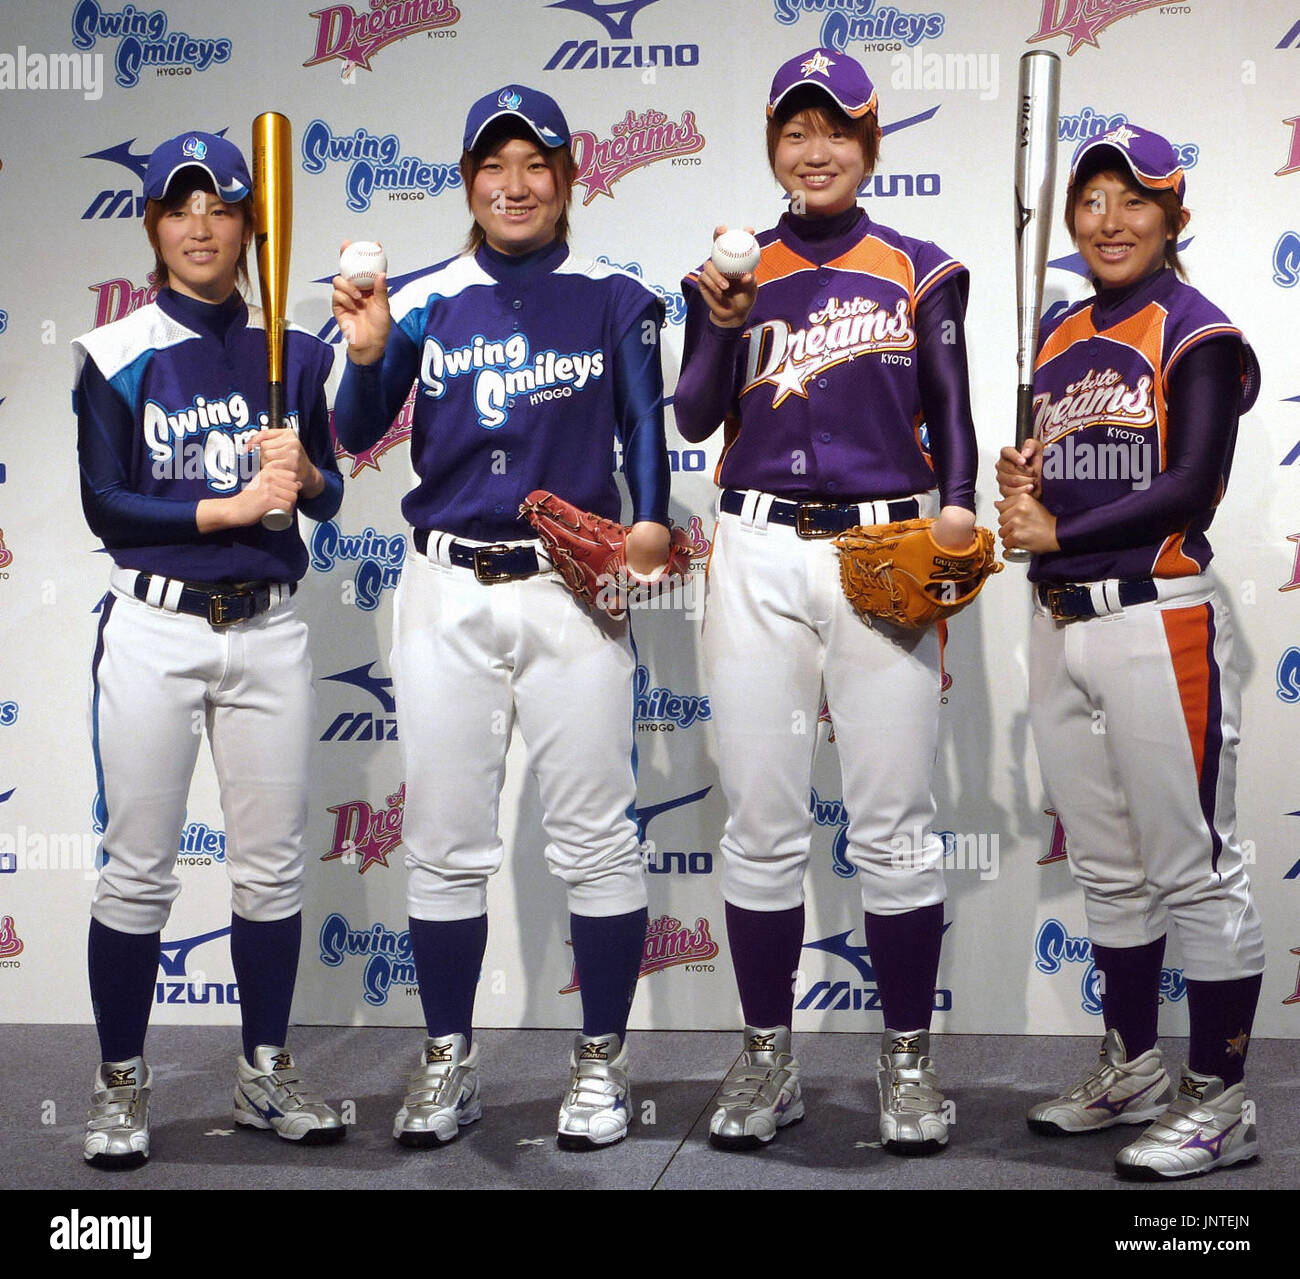 OSAKA, Japan - Players from two teams in the to-be-inaugurated Girls  Professional Baseball League -- the Kyoto Asto Dreams and the Hyogo Swing  Smileys -- show off their jerseys on March 5,